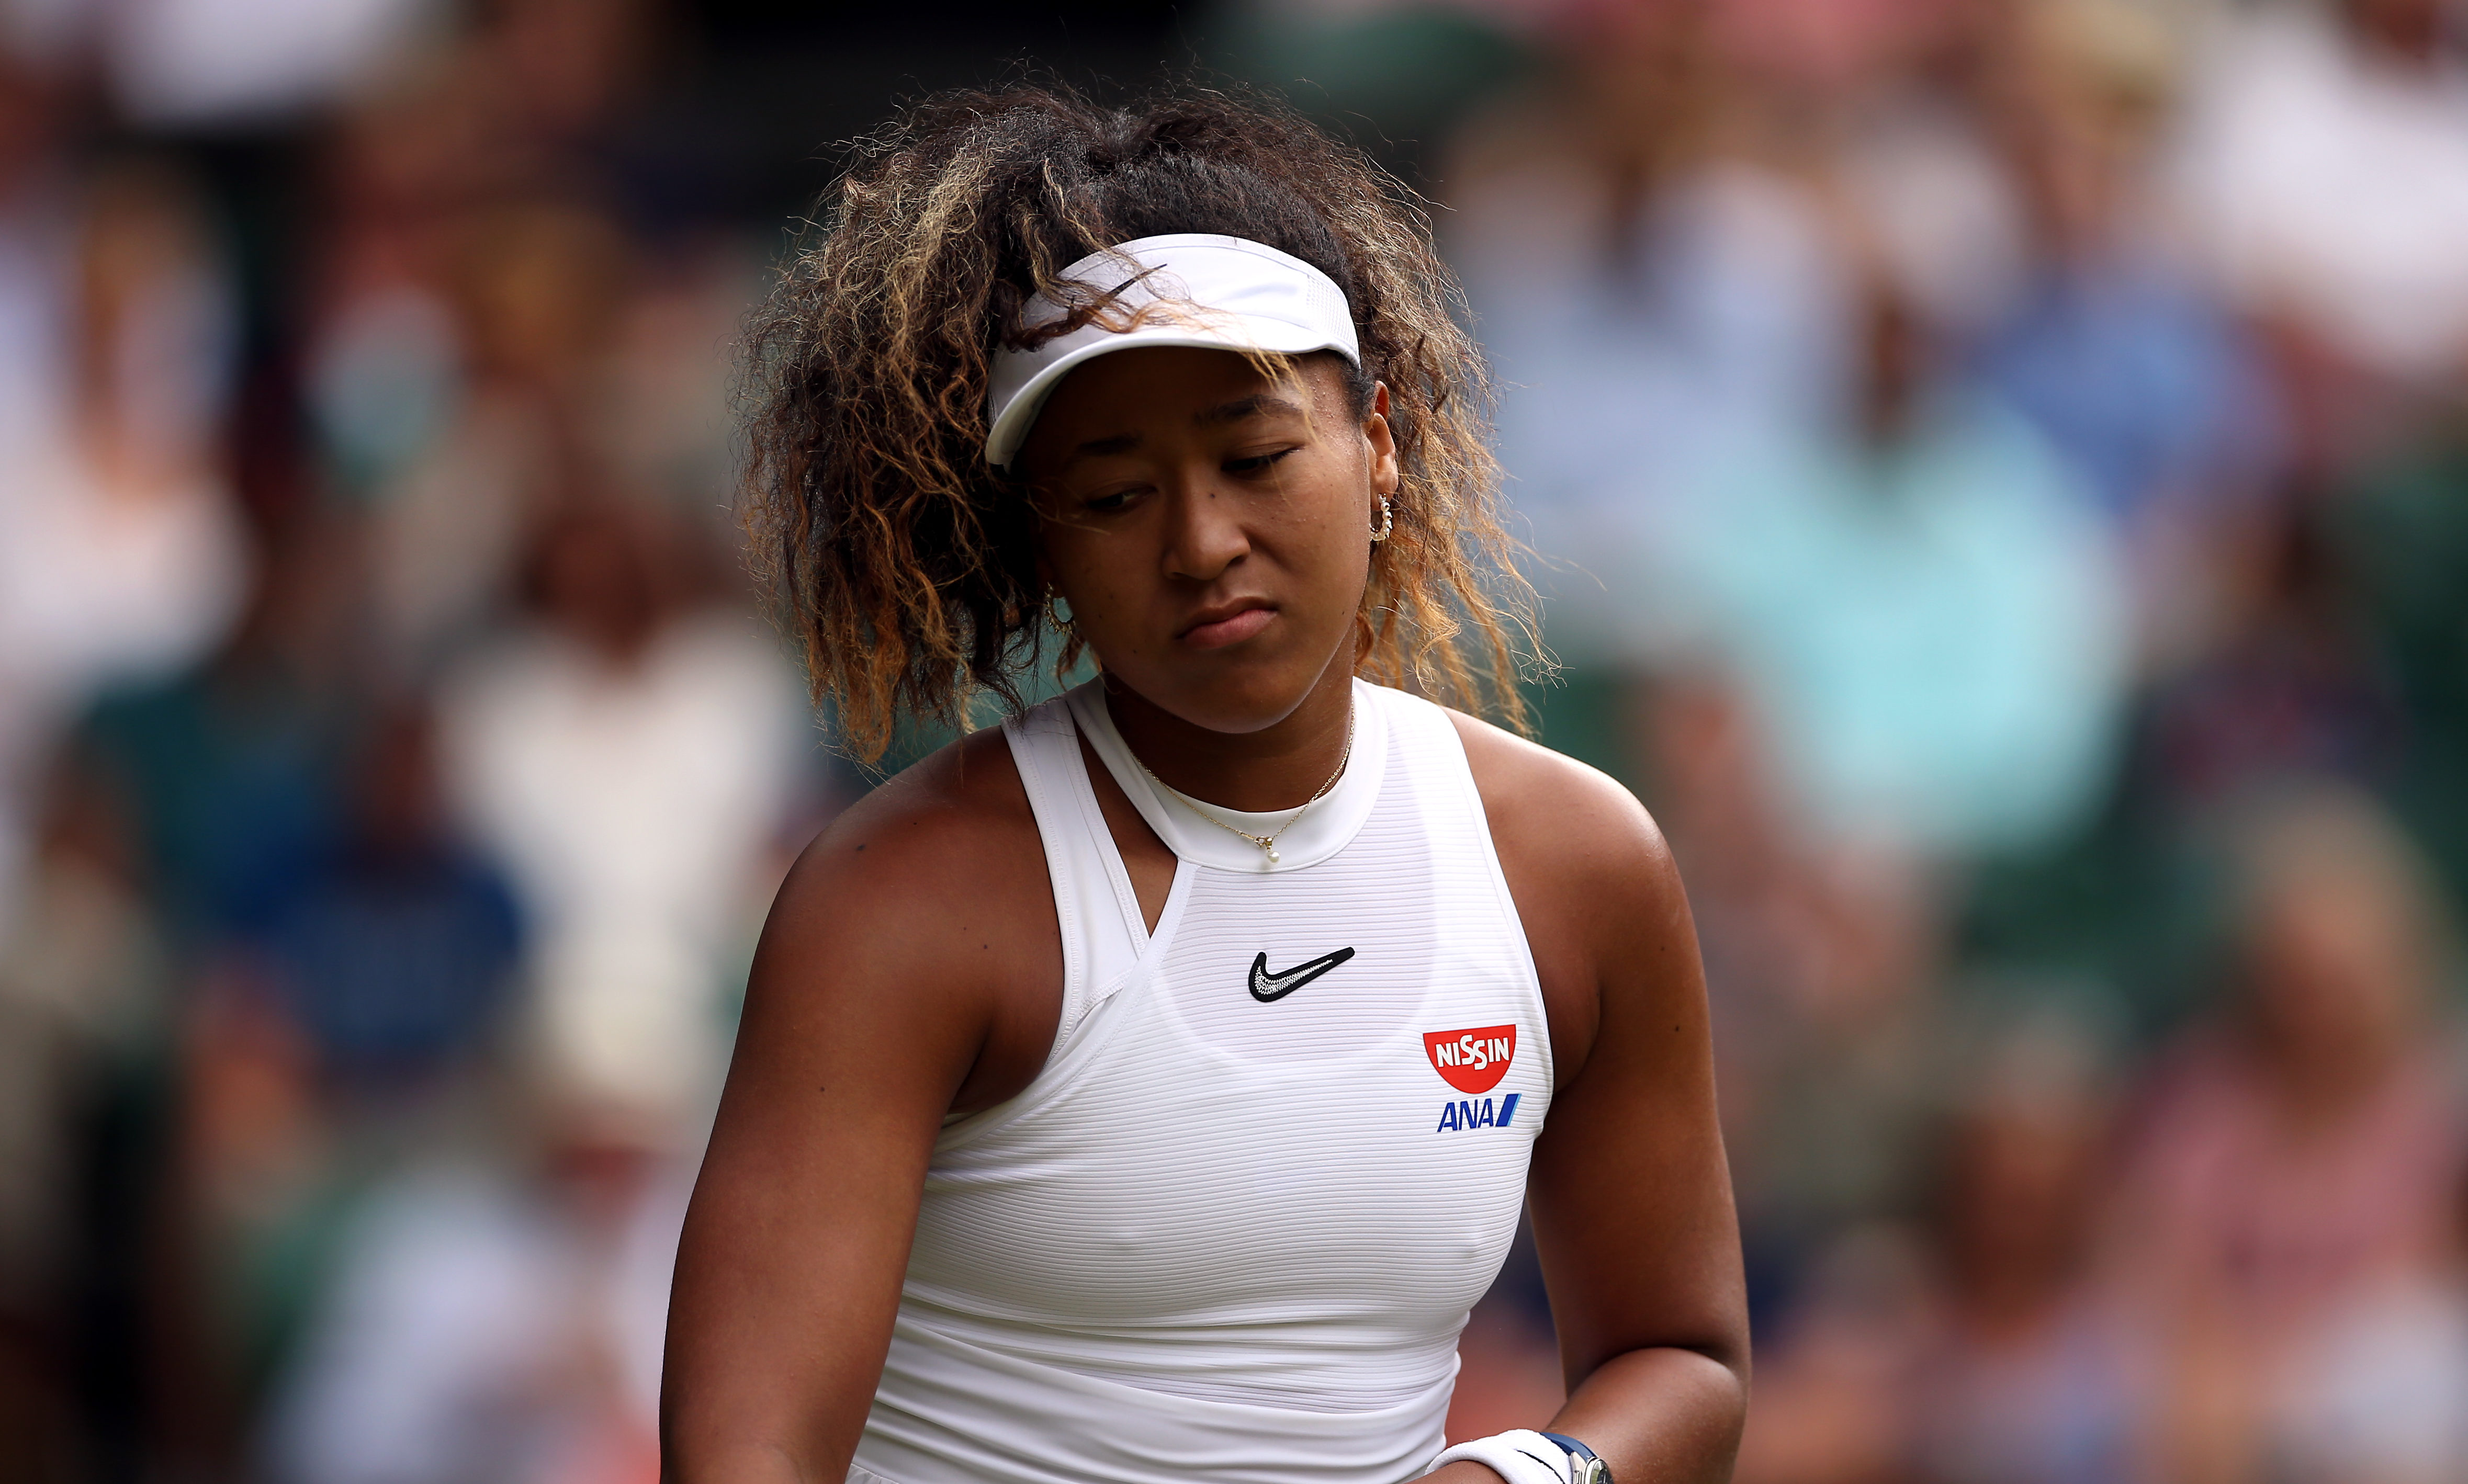 Defending champion Naomi Osaka was defeated by Belinda Bencic in the fourth round of the 2019 US Open.